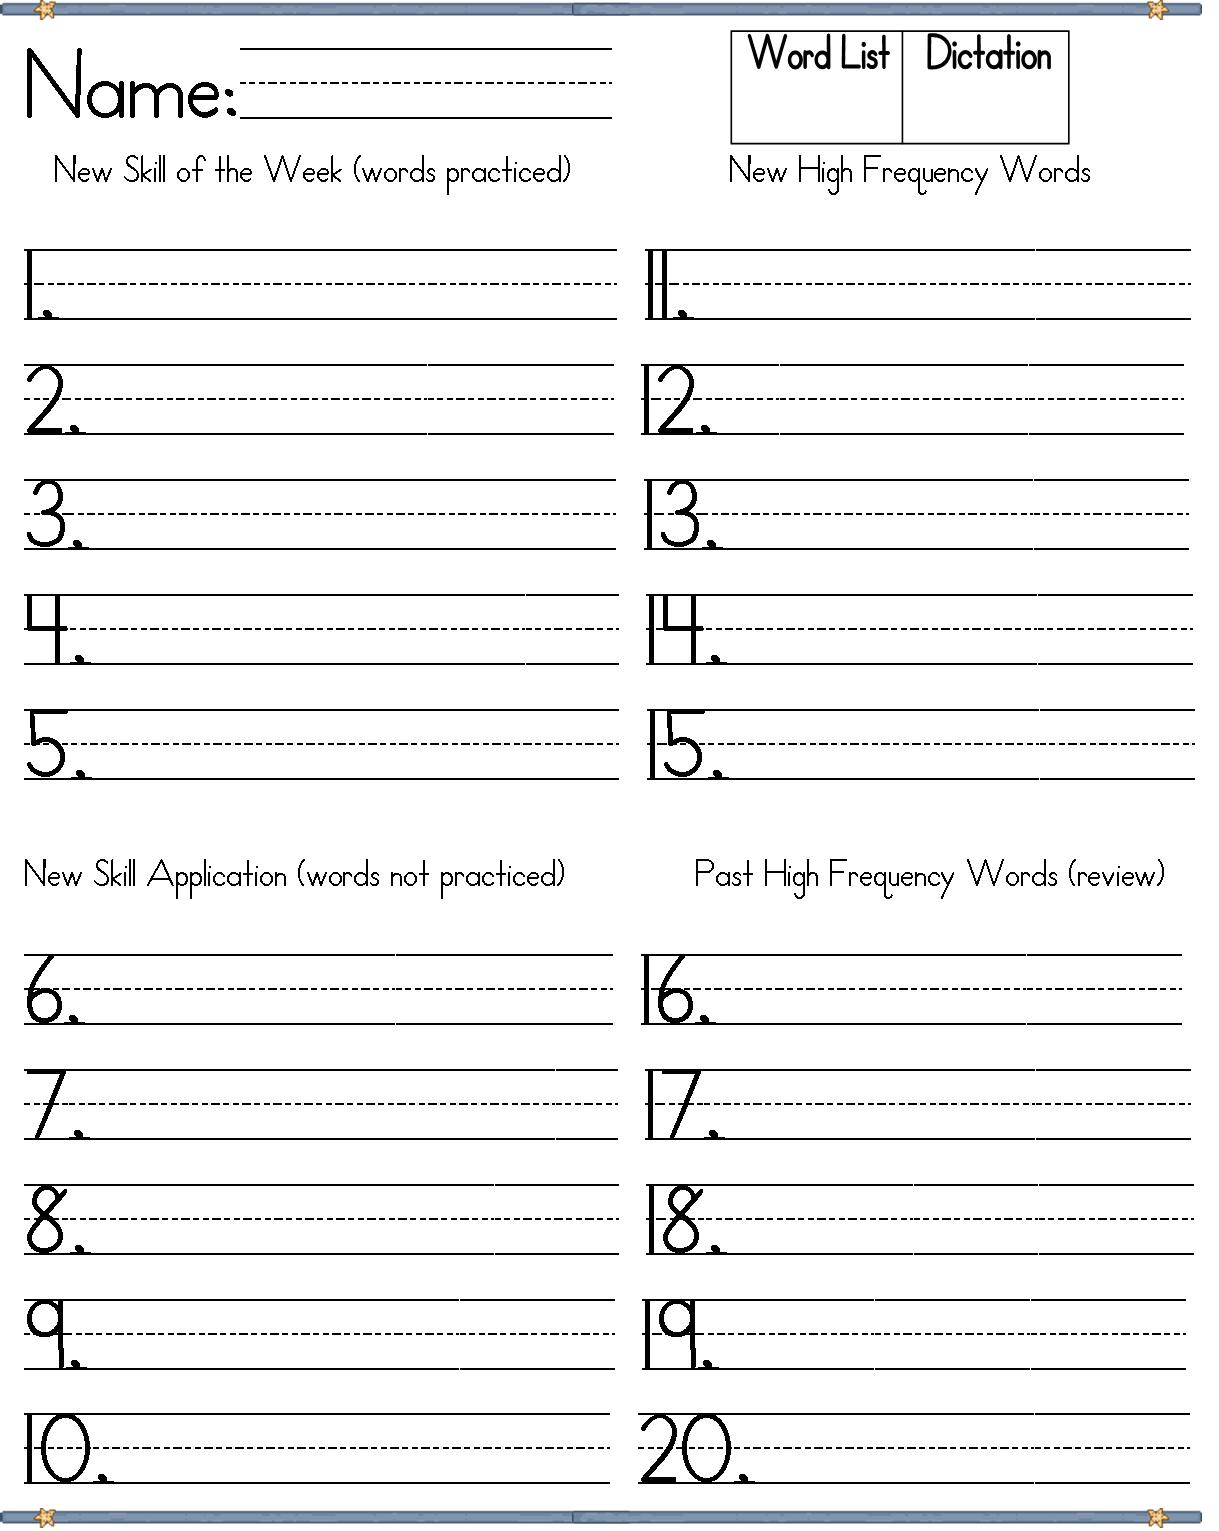 spelling-test-template-search-results-calendar-2015